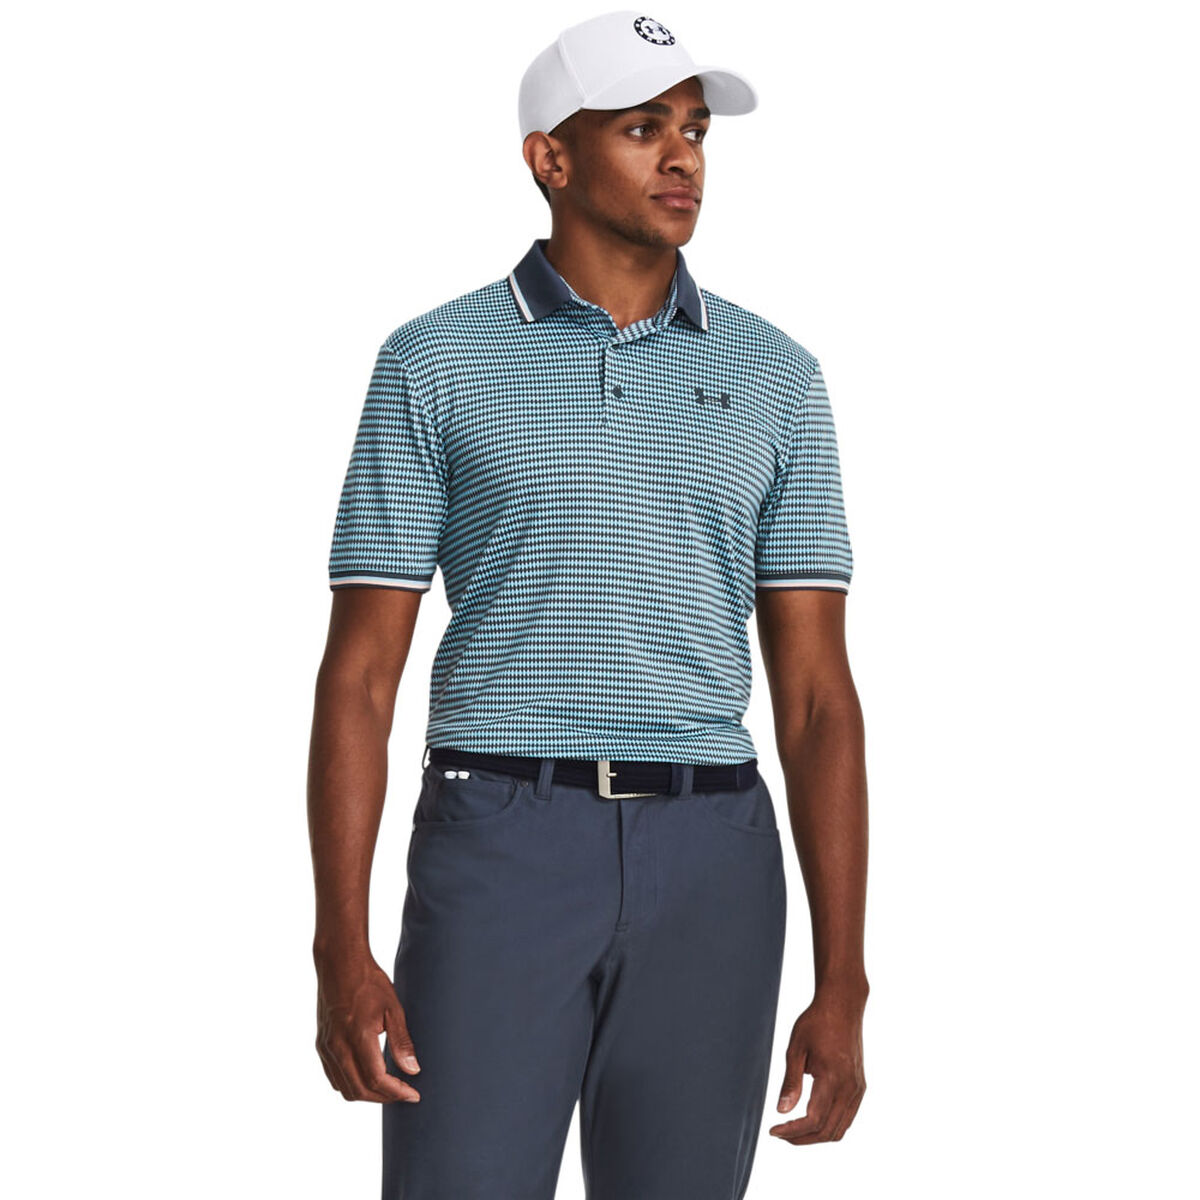 Under Armour Men’s Playoff 3.0 Rib Printed Golf Polo Shirt, Mens, Downpour gray/blizzard/gray, Large | American Golf